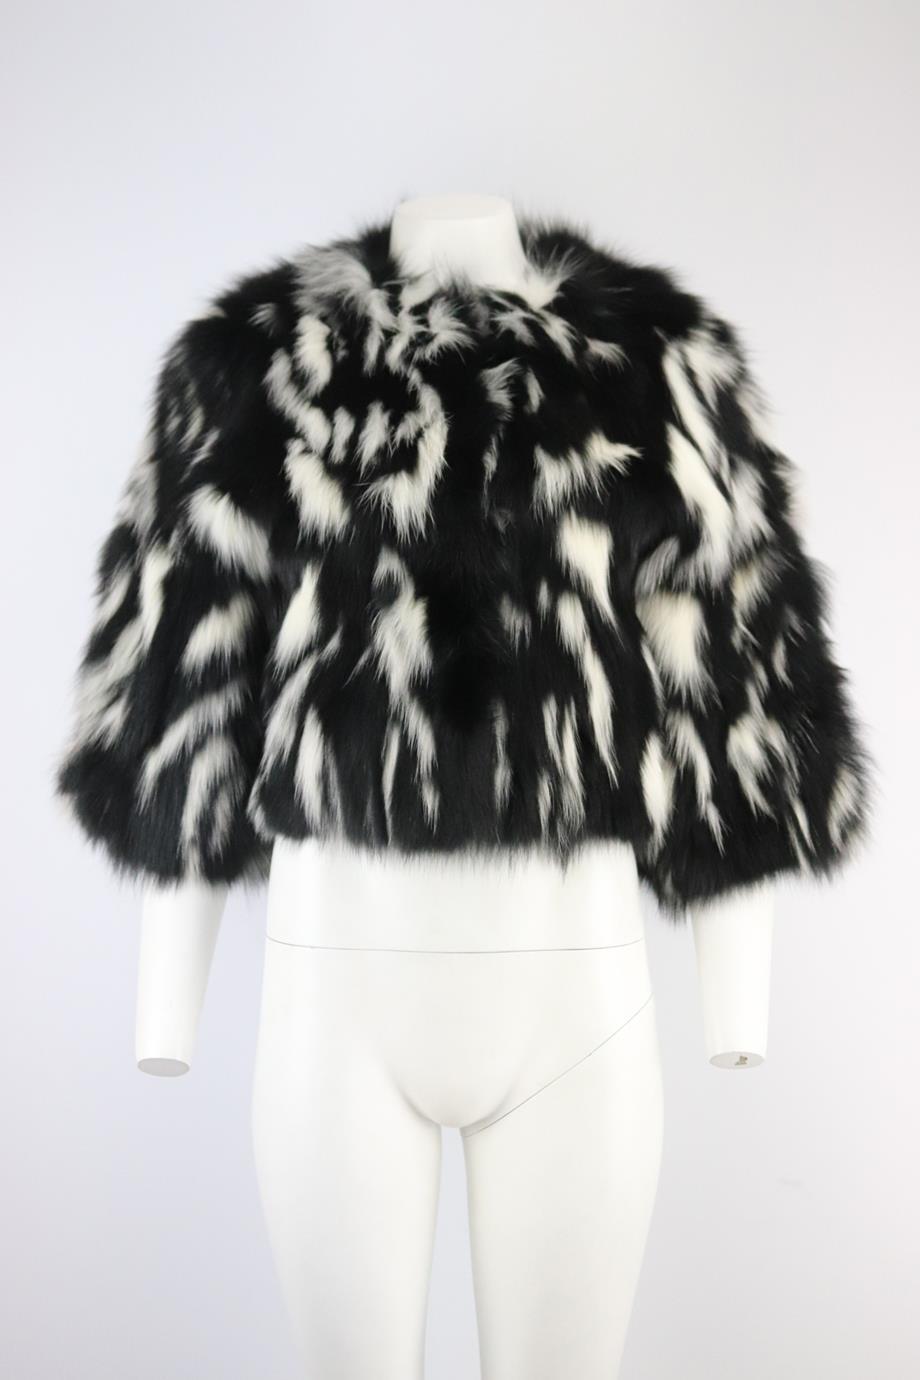 Yves Salomon fox fur jacket. Black and white. Short sleeve, crewneck. Snap button fastening at front. 100% Fox fur; lining: 100% silk. Size: Small (UK 8, US 4, FR 36, IT 40). Shoulder to shoulder: 16 in. Bust: 35 in. Waist: 36 in. Hips: 37 in.